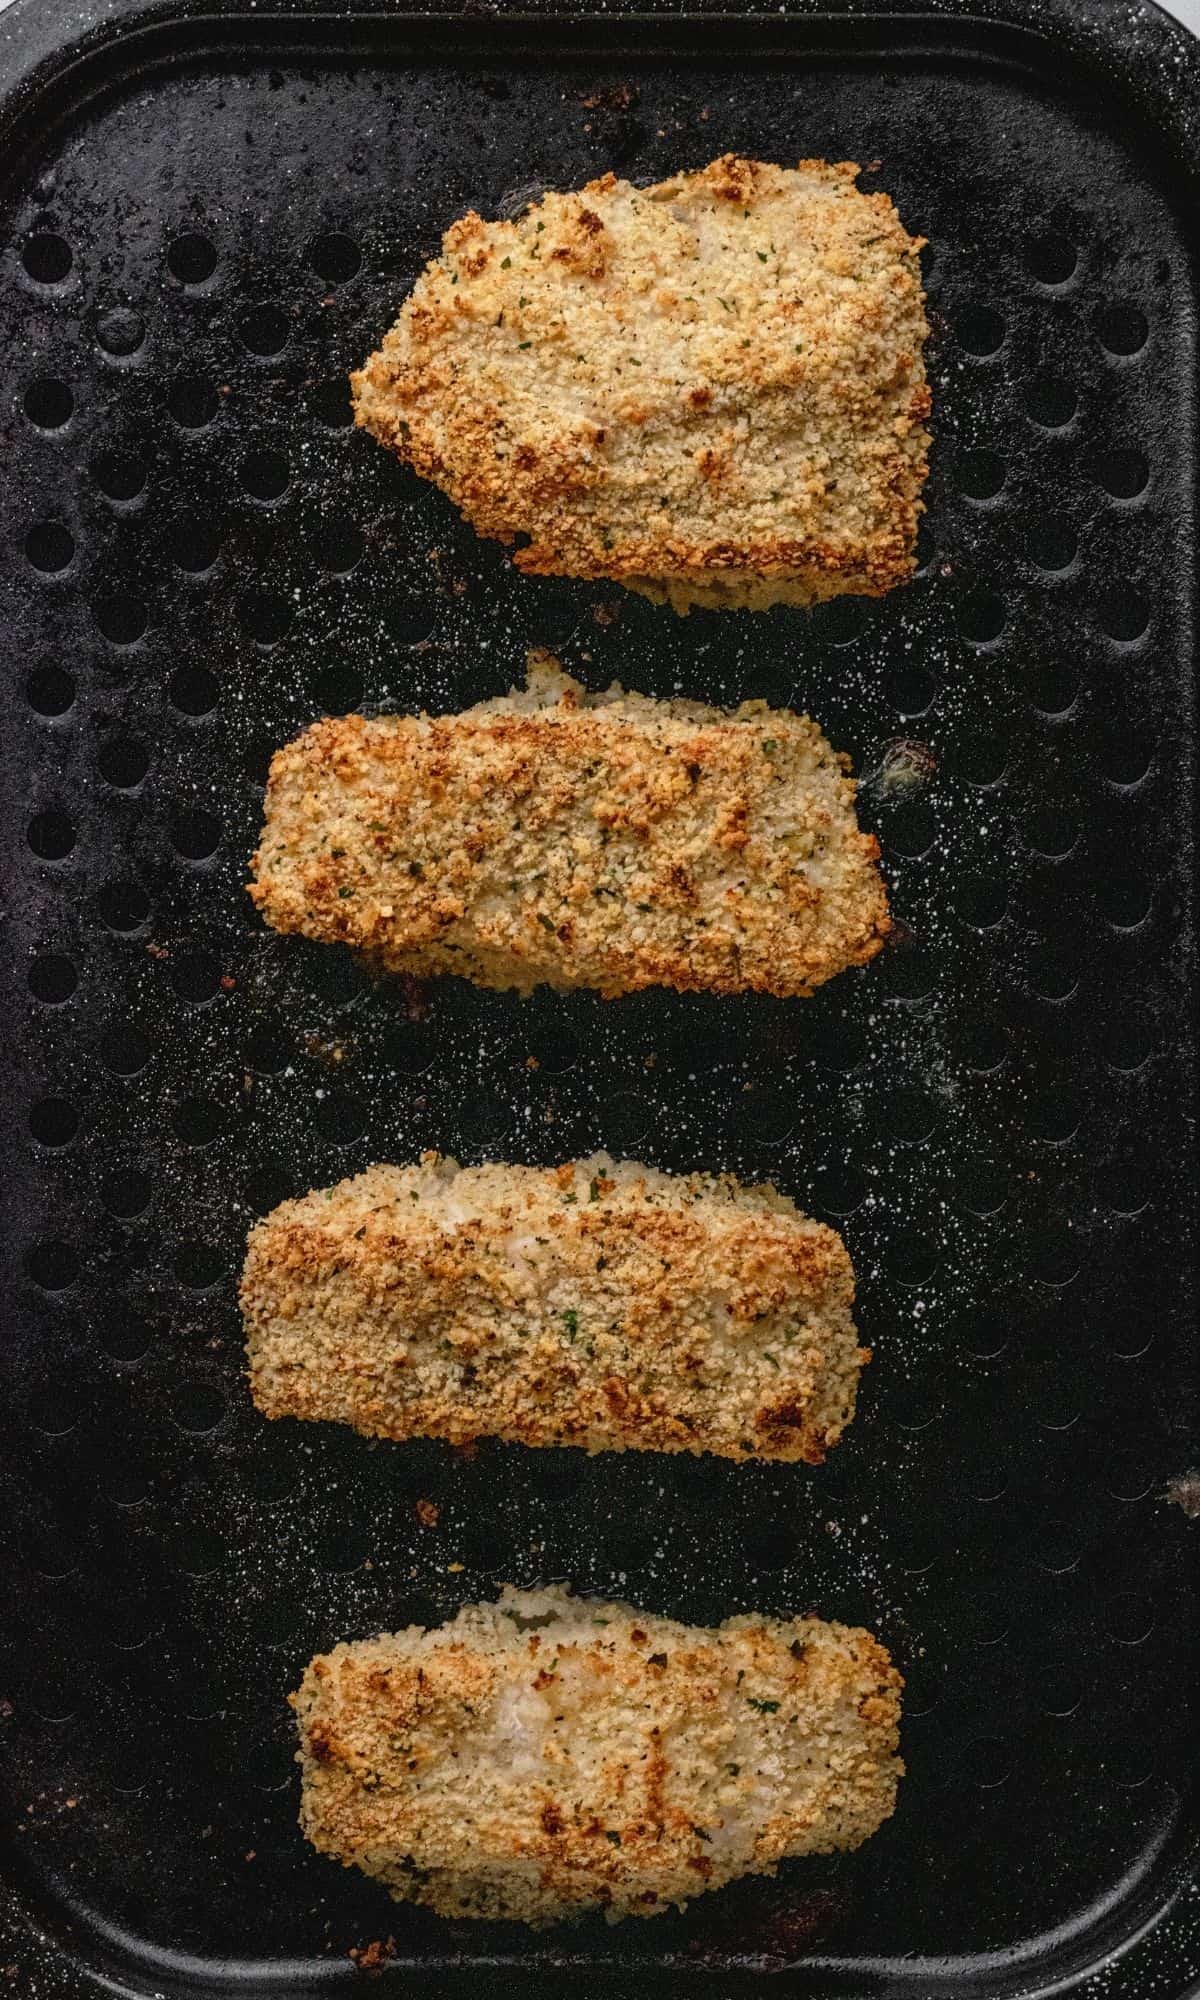 Crunchy Baked Cod with Parmesan Panko Breadcrumbs on broiler pan after baking.